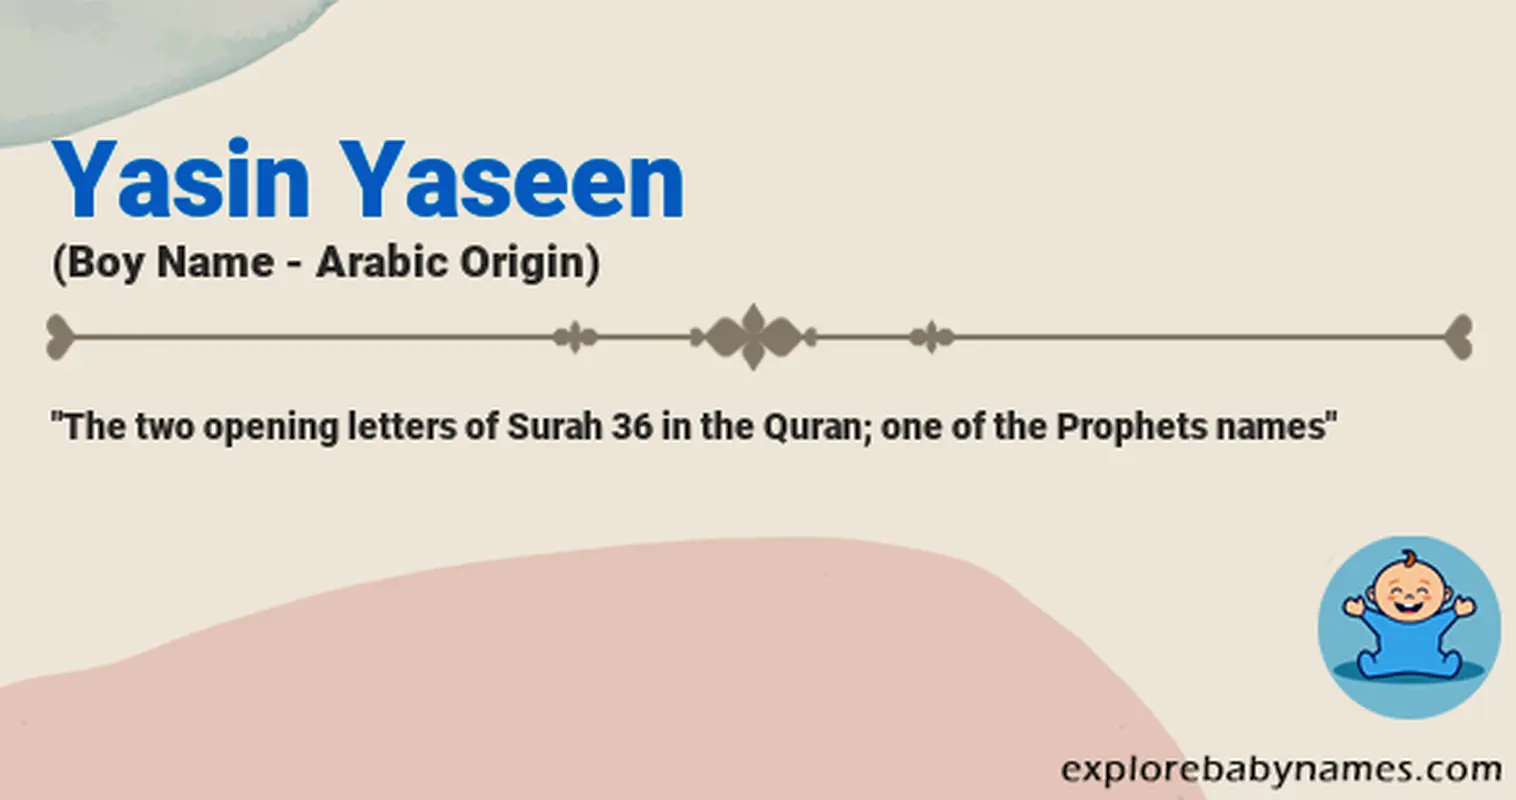 Meaning of Yasin Yaseen